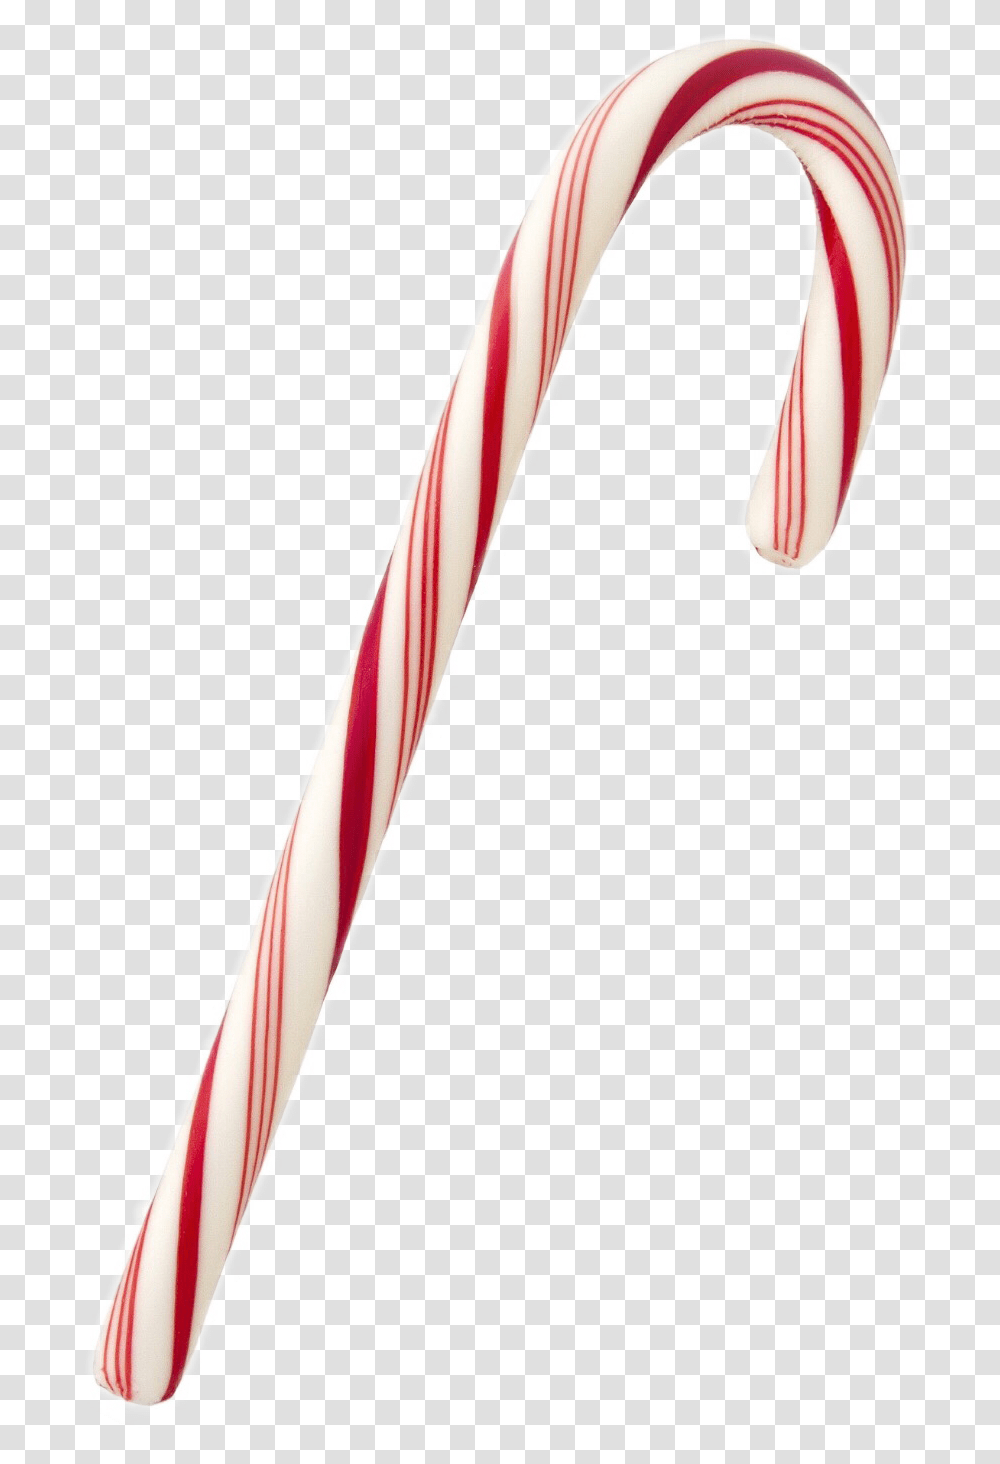 Download Candycane Christmas Holiday Peppermint Candy Candy Cane, Food, Sweets, Confectionery, Stick Transparent Png